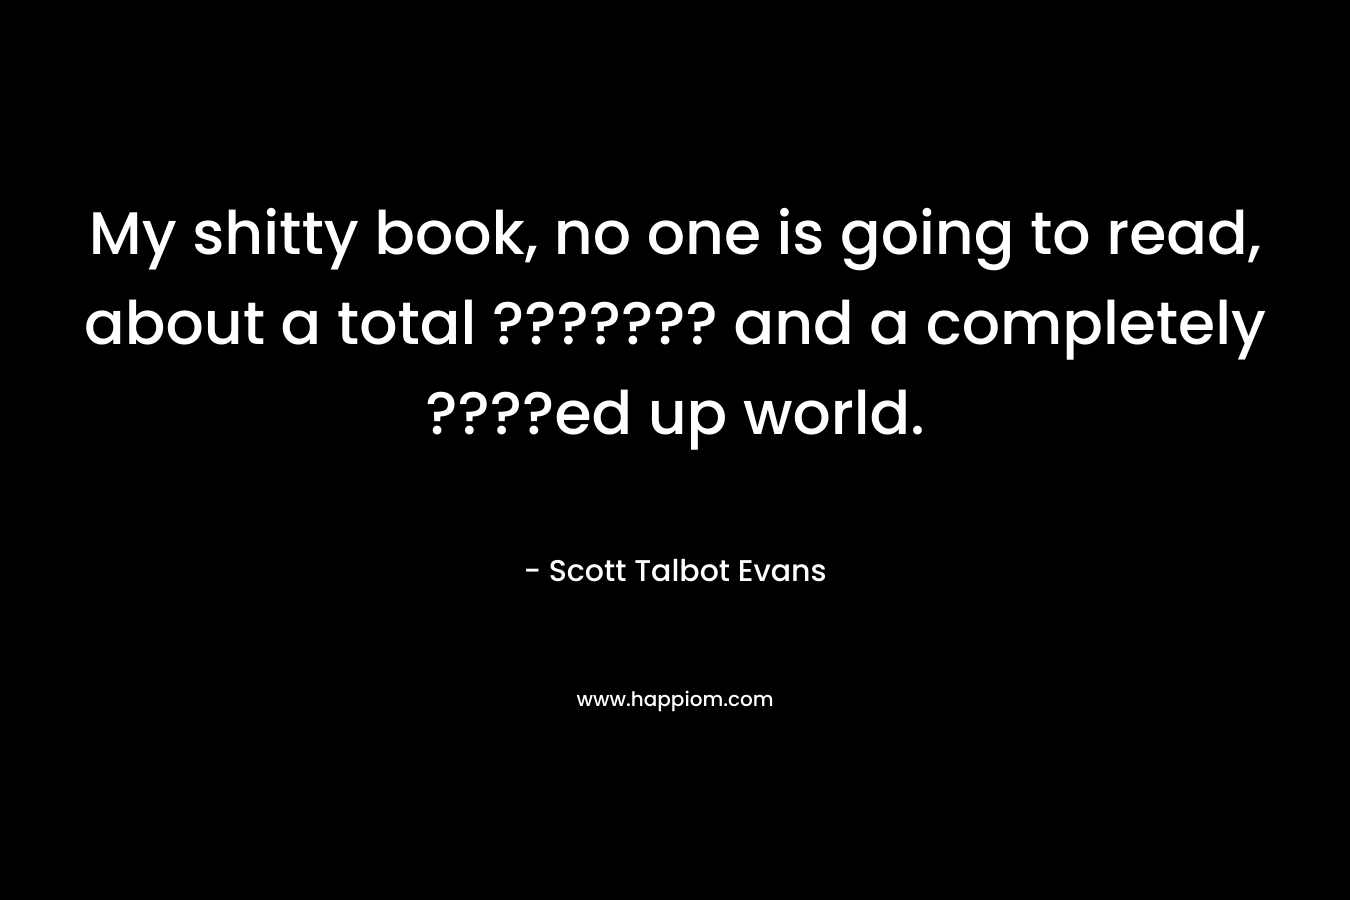 My shitty book, no one is going to read, about a total ??????? and a completely ????ed up world. – Scott Talbot Evans